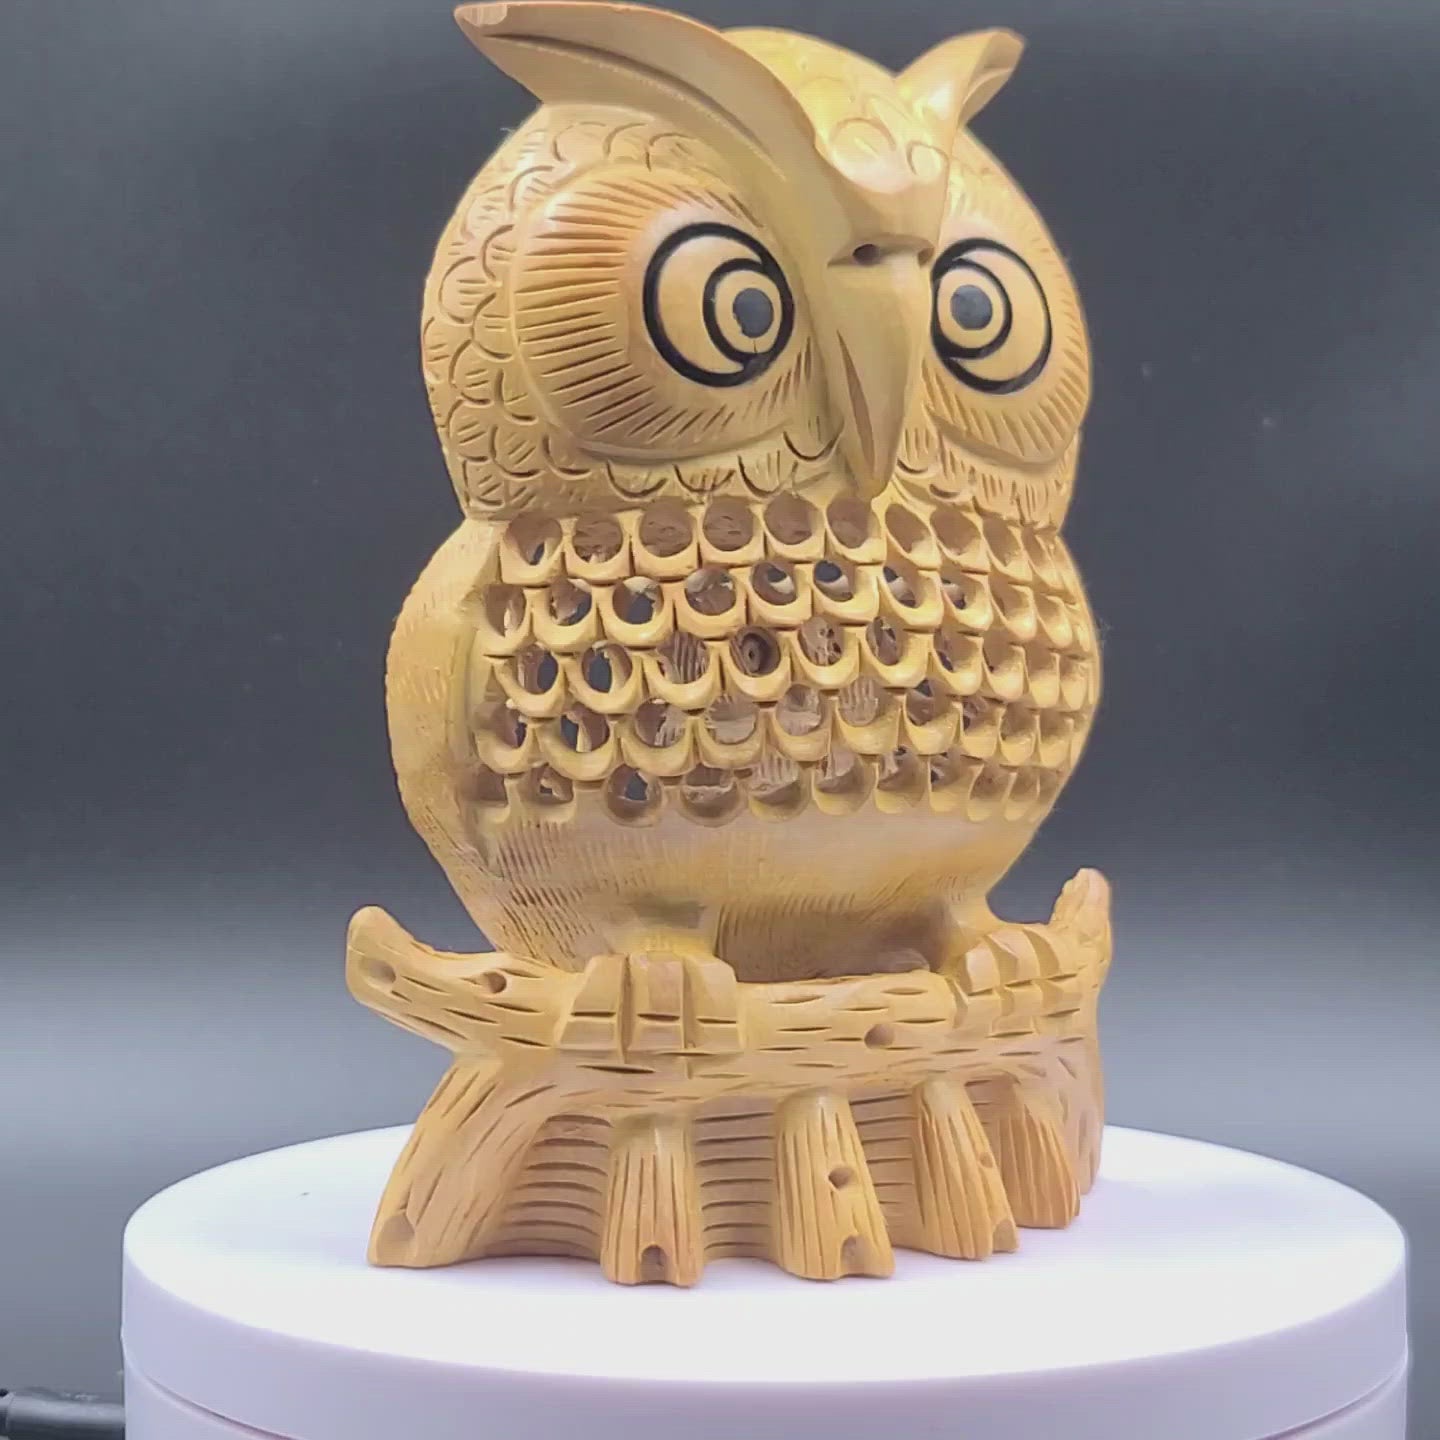 Wooden Handmade Carved Owl Statue 5-Inch